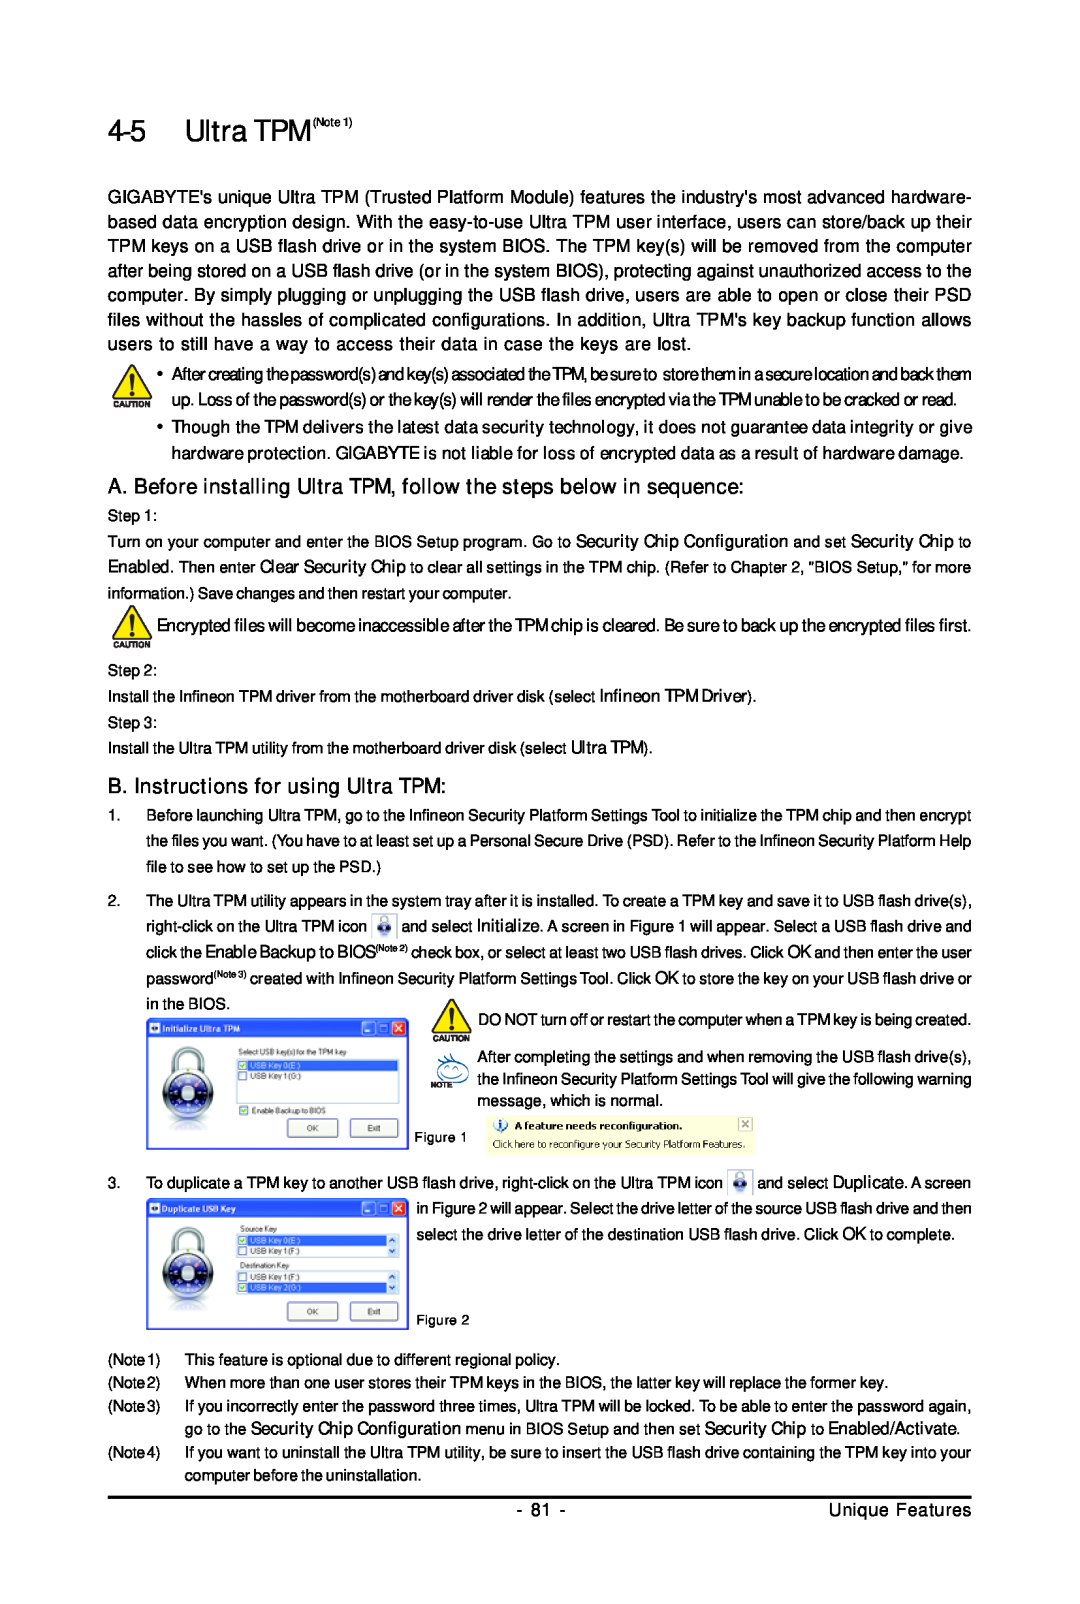 Gigabyte GA-EP45-UD3P user manual Ultra TPMNote, A. Before installing Ultra TPM, follow the steps below in sequence 